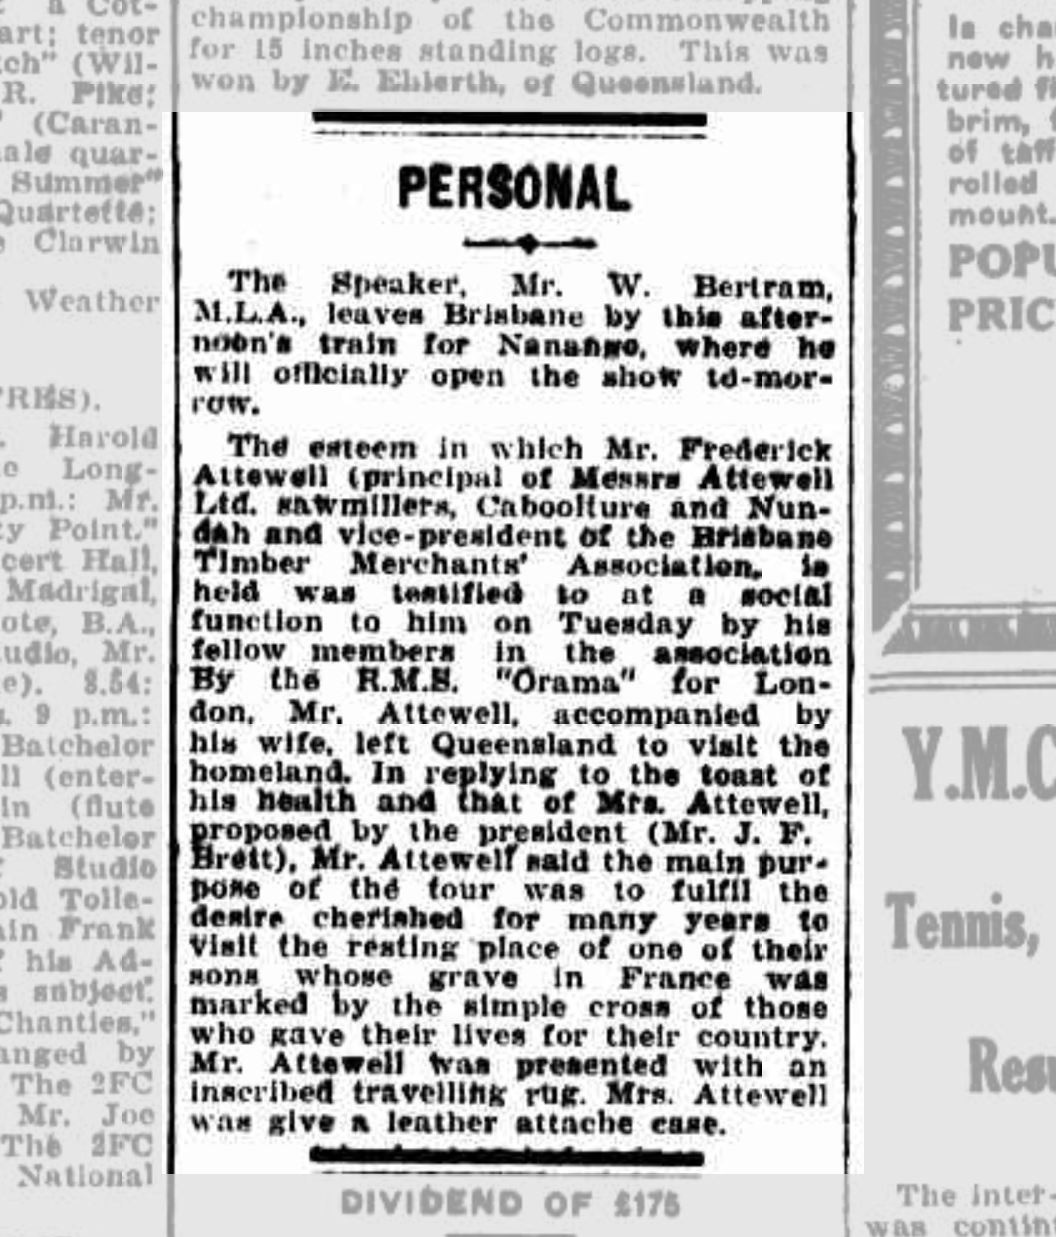 PERSONAL 1927 April 21 News article about Frederick Attewells trip to Europe to visit the grave of his son Jack Attewell